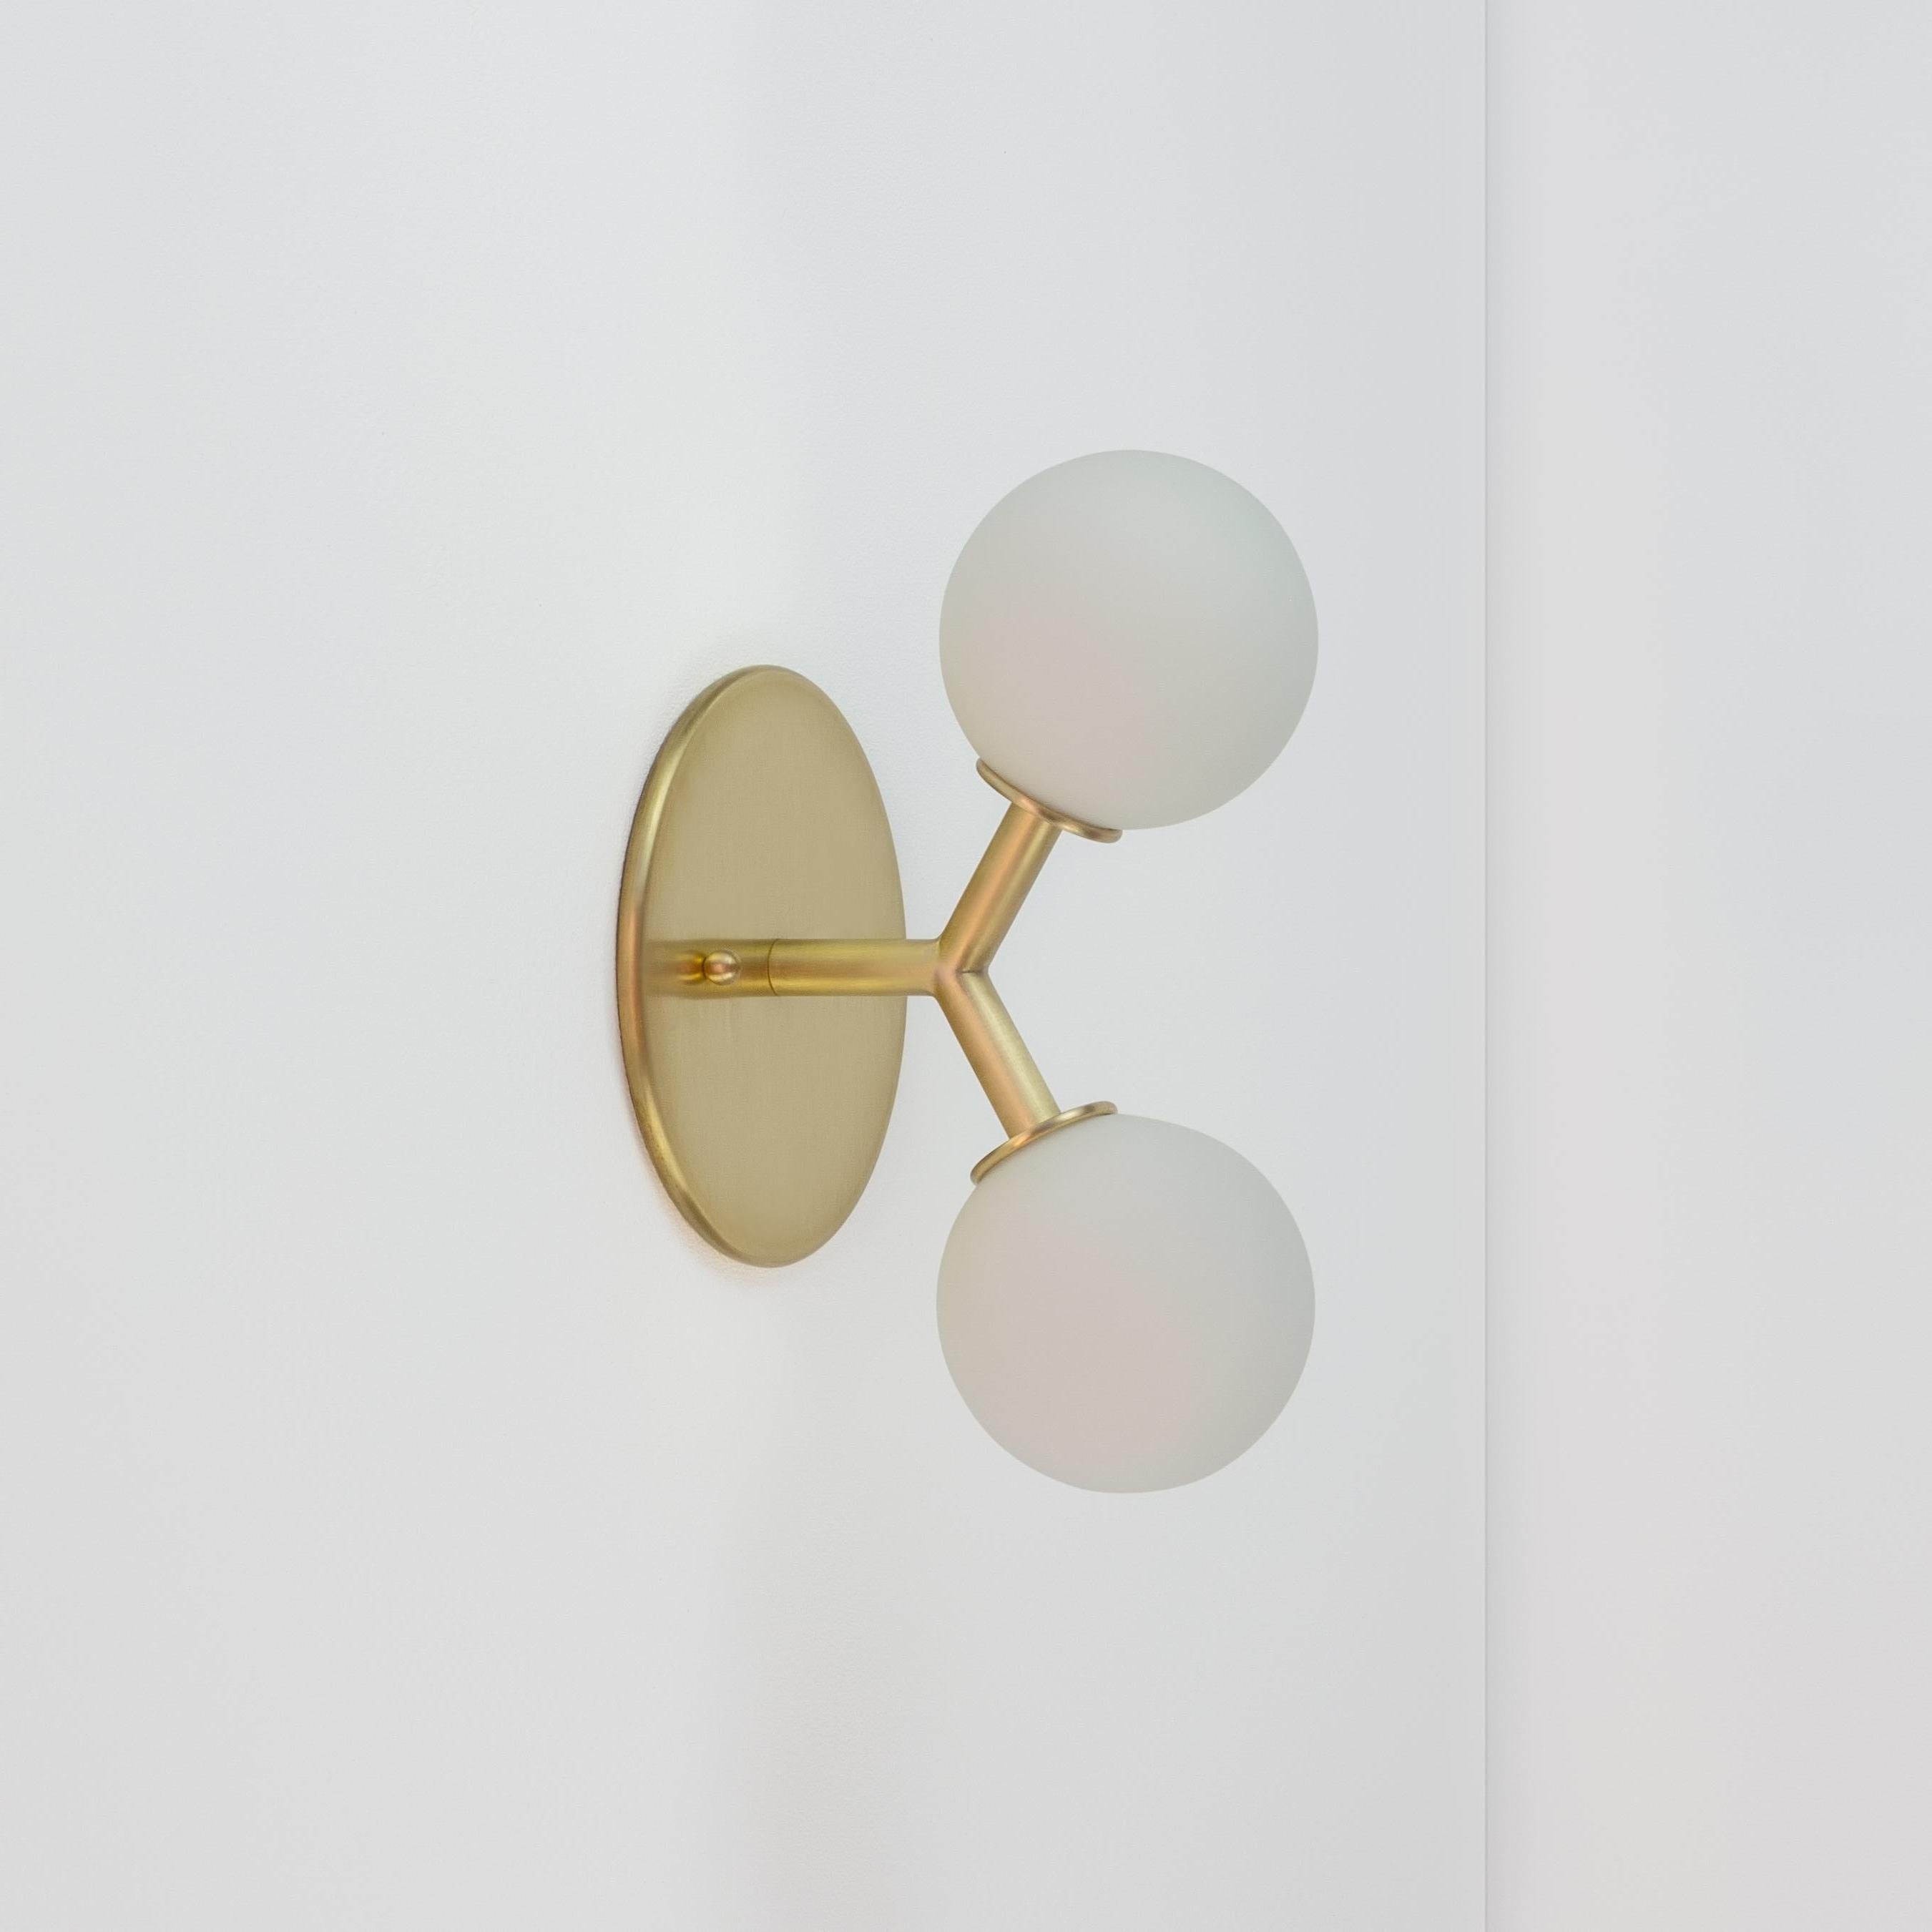 American Pair of Y Sconce by Research Lighting, Brass, In Stock